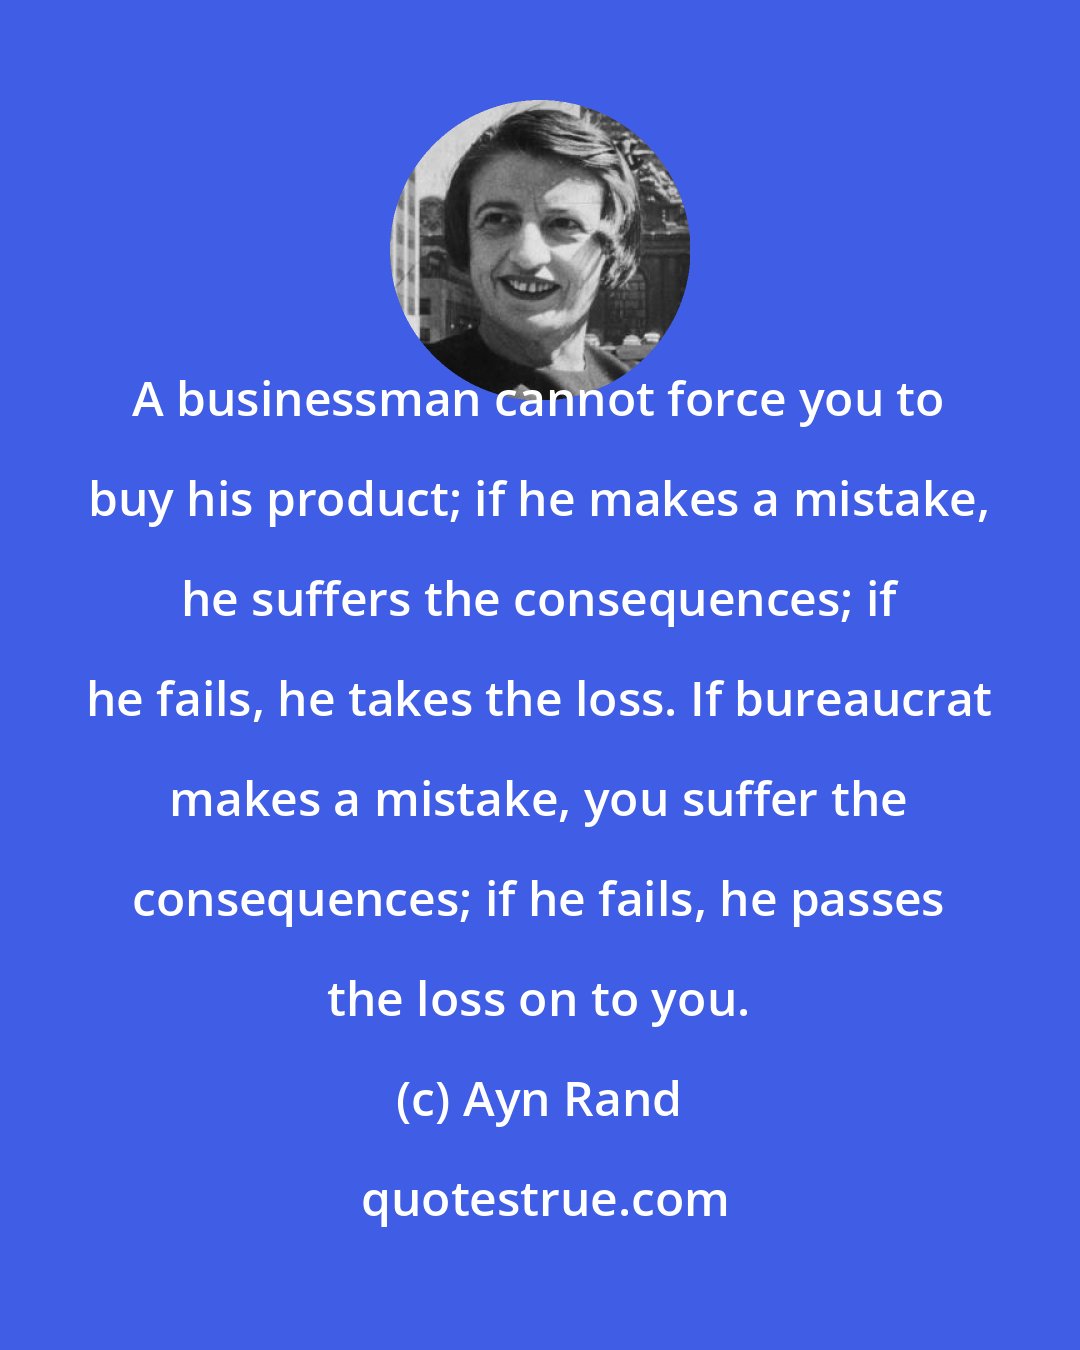 Ayn Rand: A businessman cannot force you to buy his product; if he makes a mistake, he suffers the consequences; if he fails, he takes the loss. If bureaucrat makes a mistake, you suffer the consequences; if he fails, he passes the loss on to you.